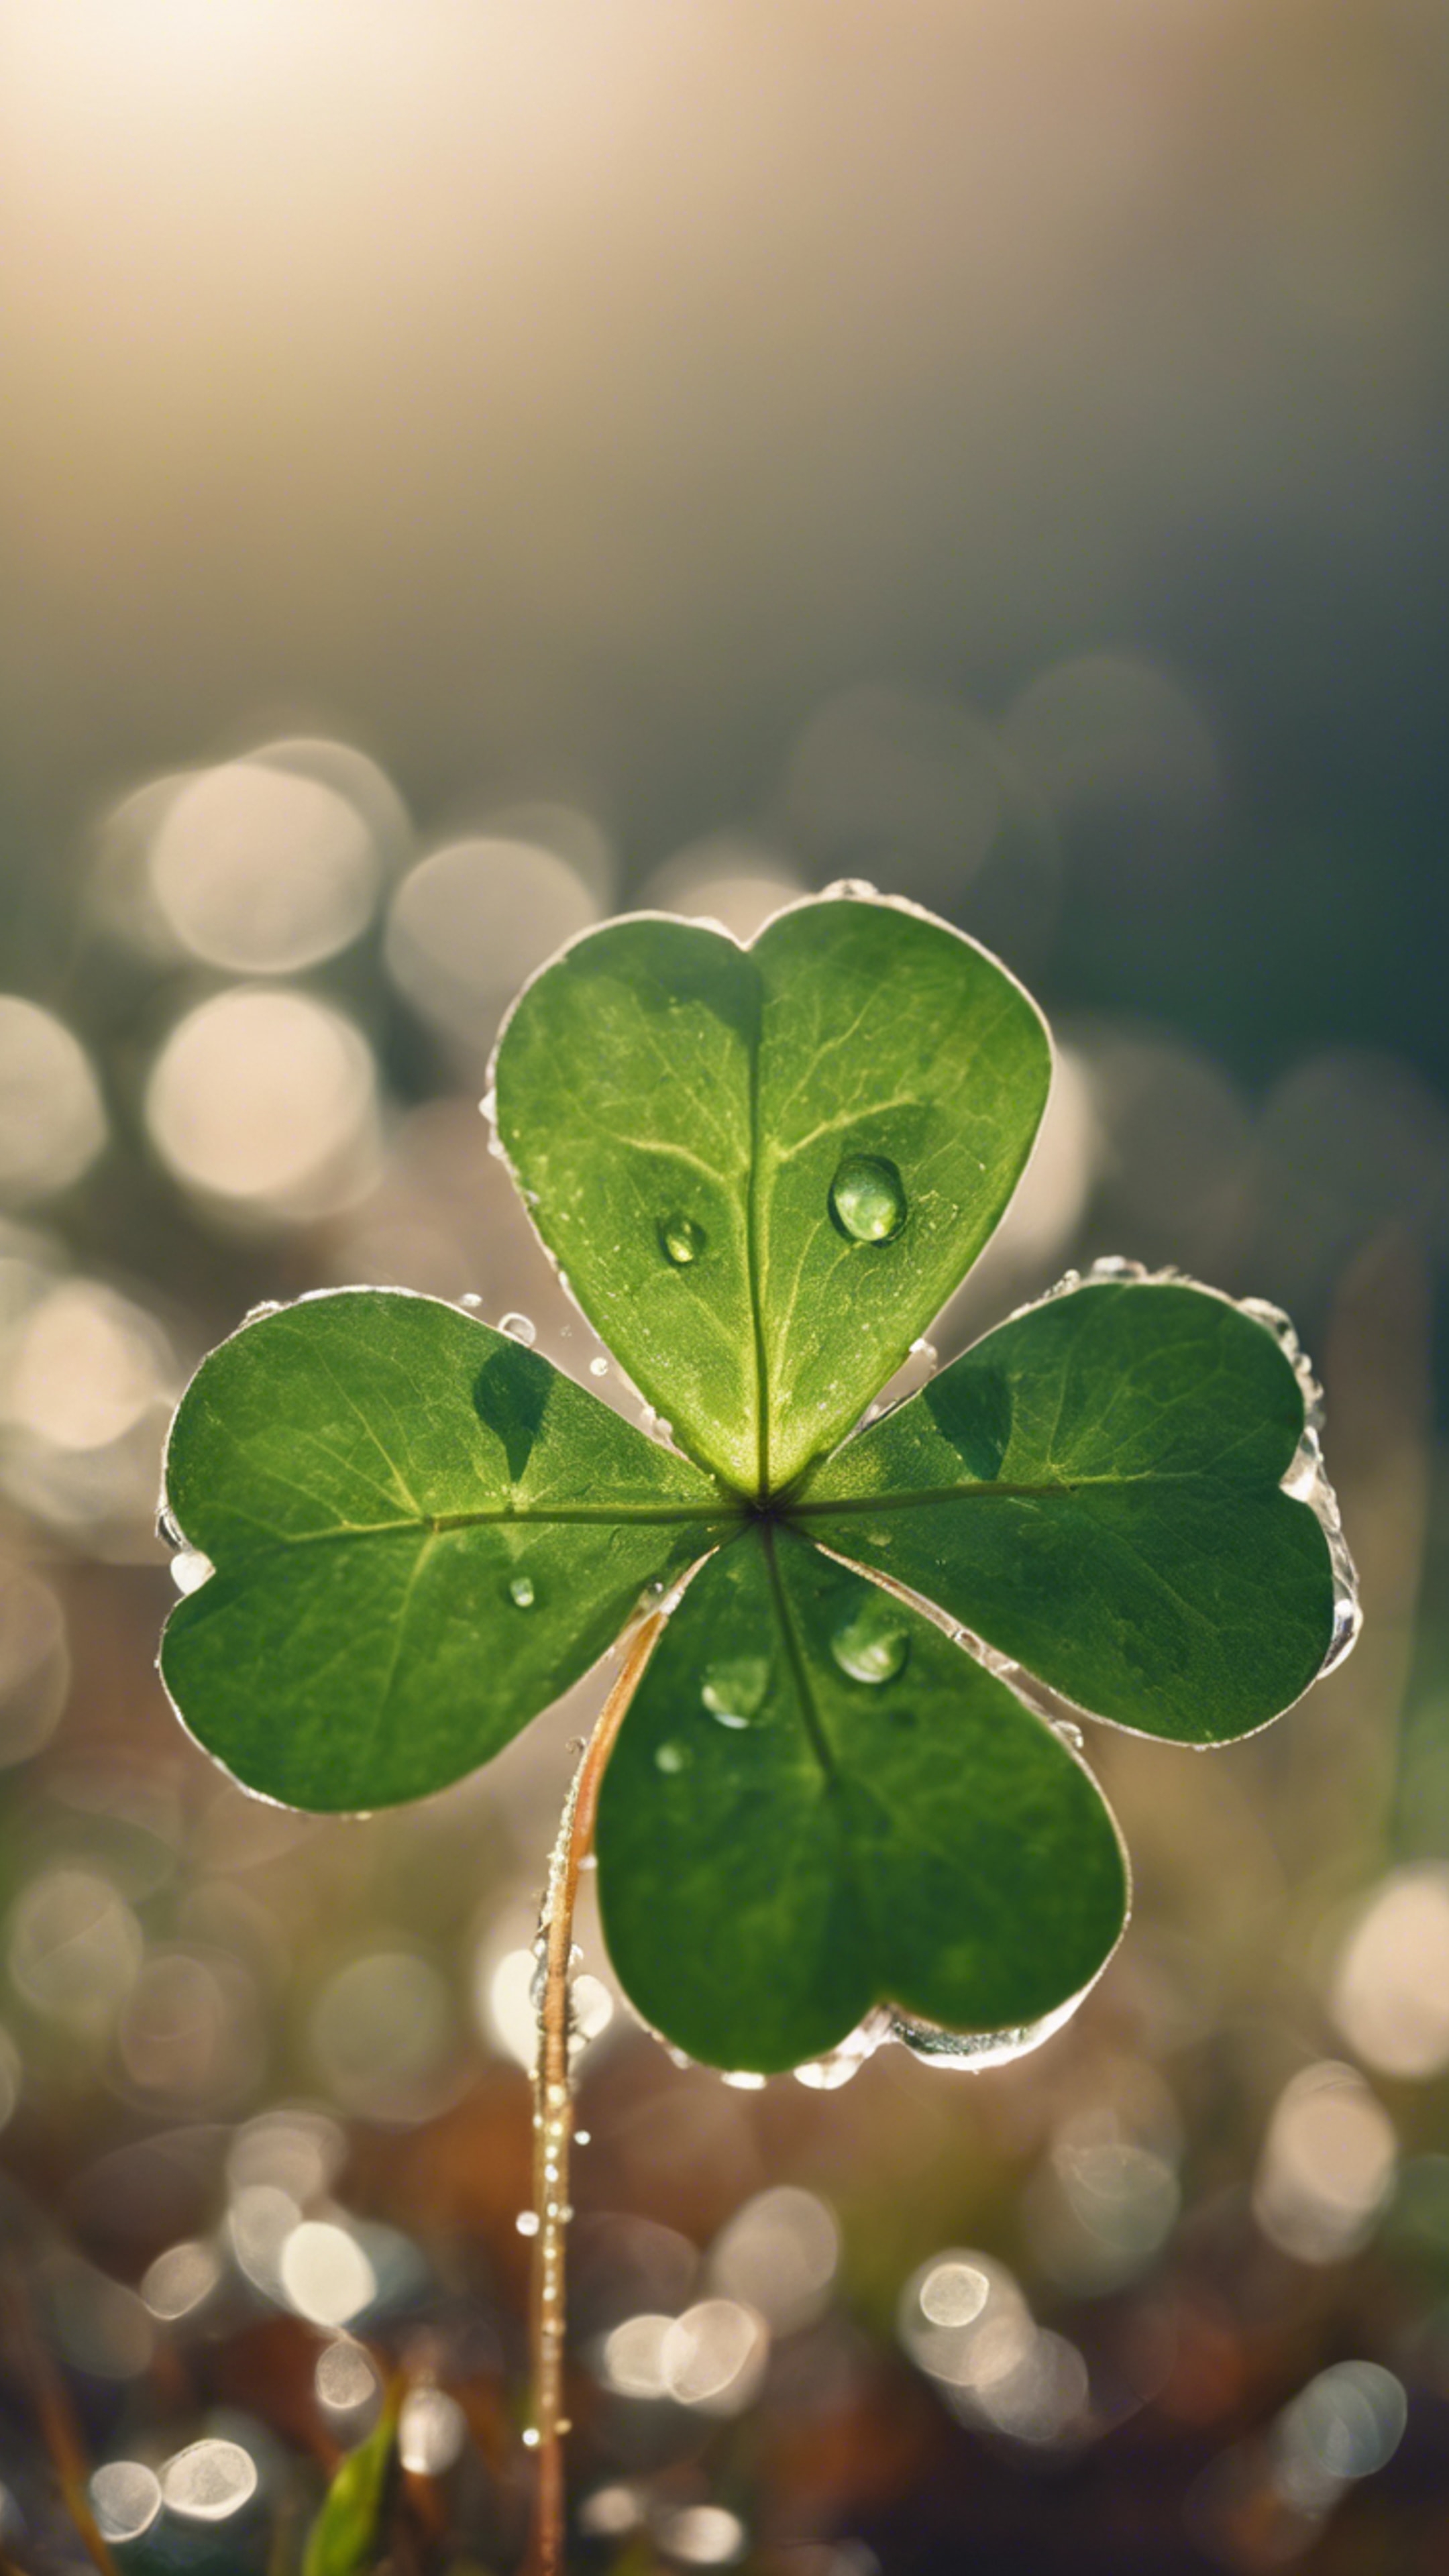 A close-up view of a four leaf clover gleaming in the morning dew. Tapetai[b8d84a1222284df192e8]